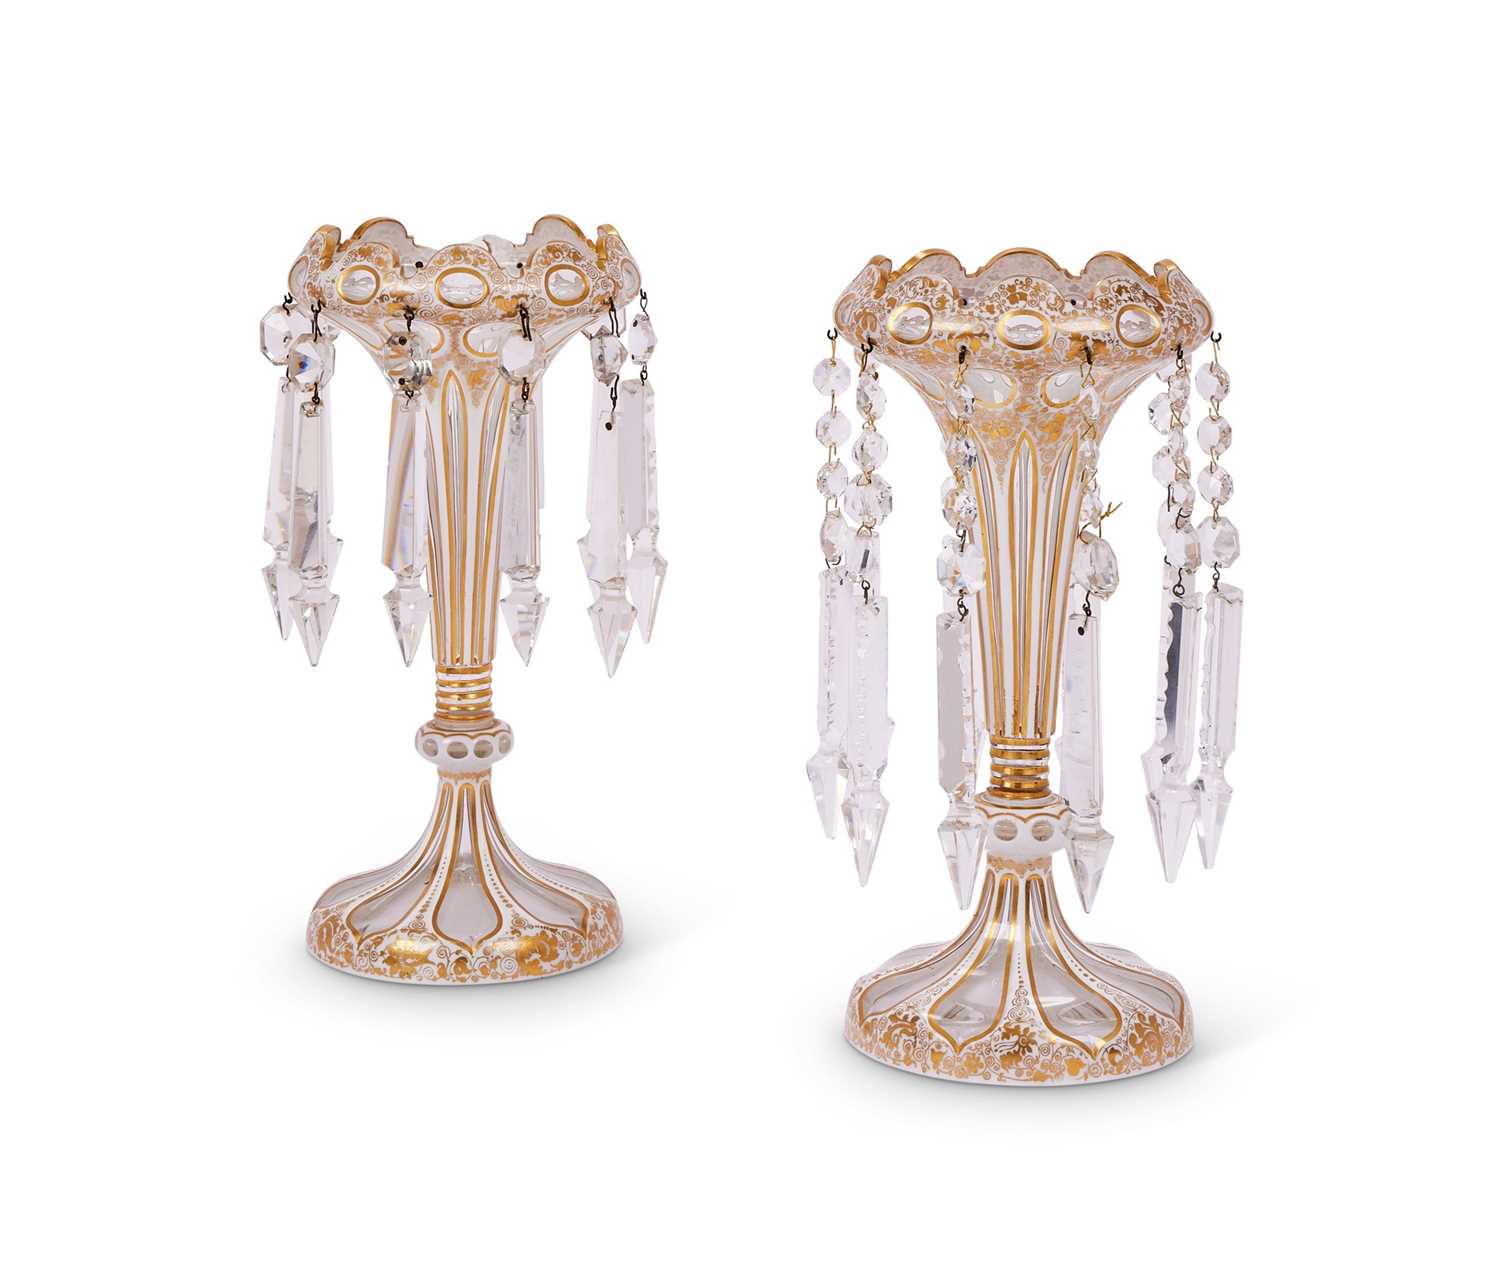 A PAIR OF 19TH CENTURY BOHEMIAN OVERLAY GLASS LUSTRE VASES